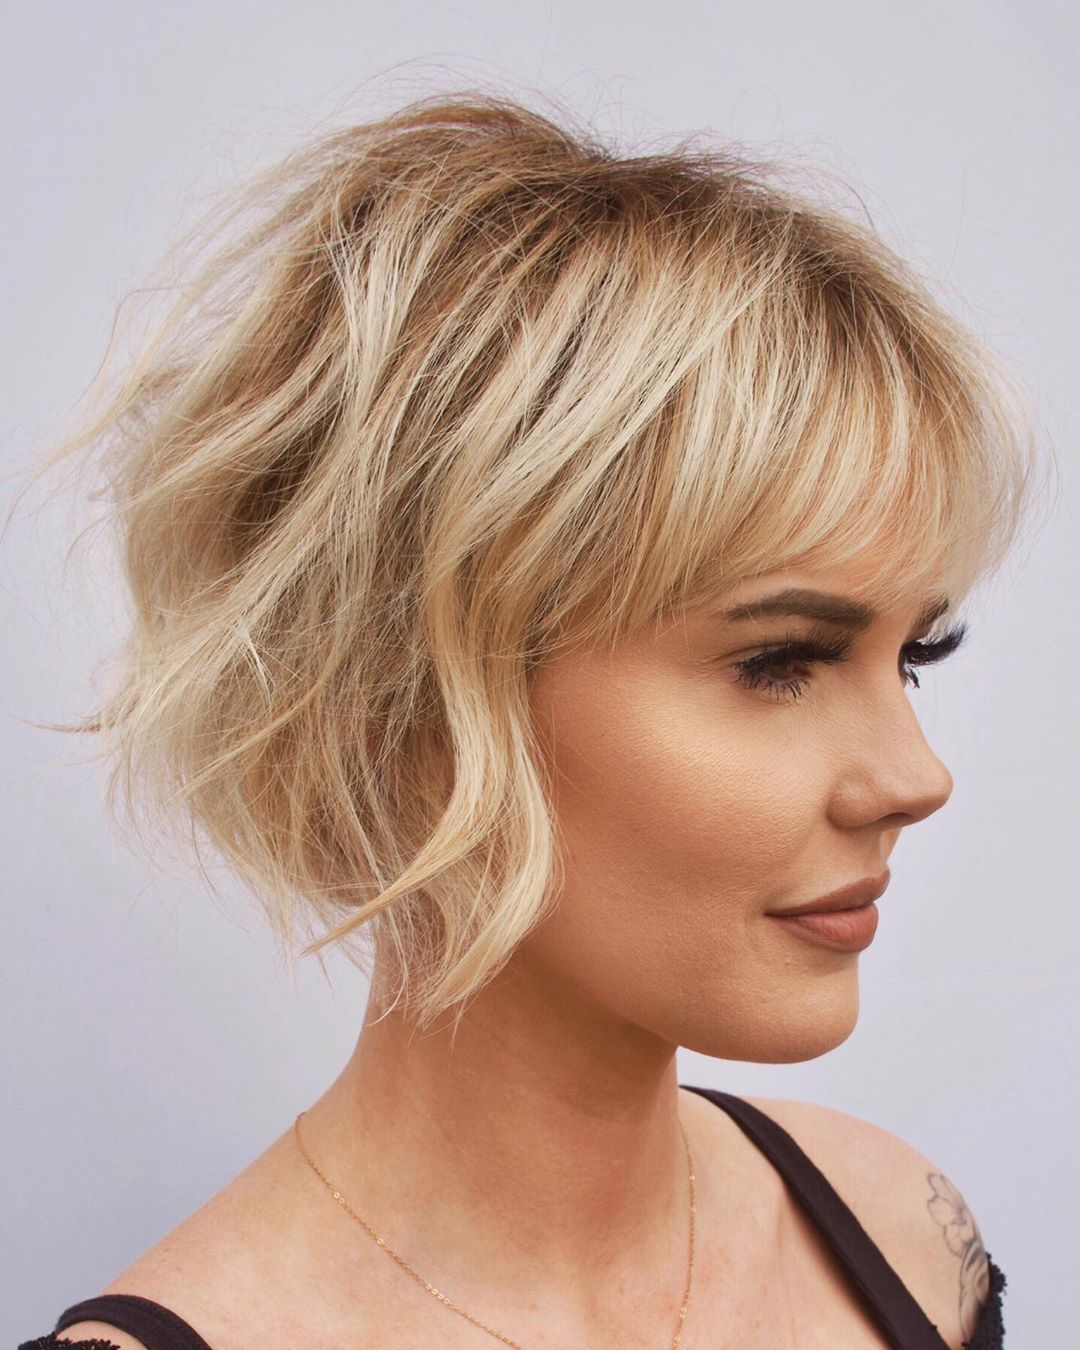 90 Best Haircuts for Thin Hair to Look Thicker - The Trend Spotter